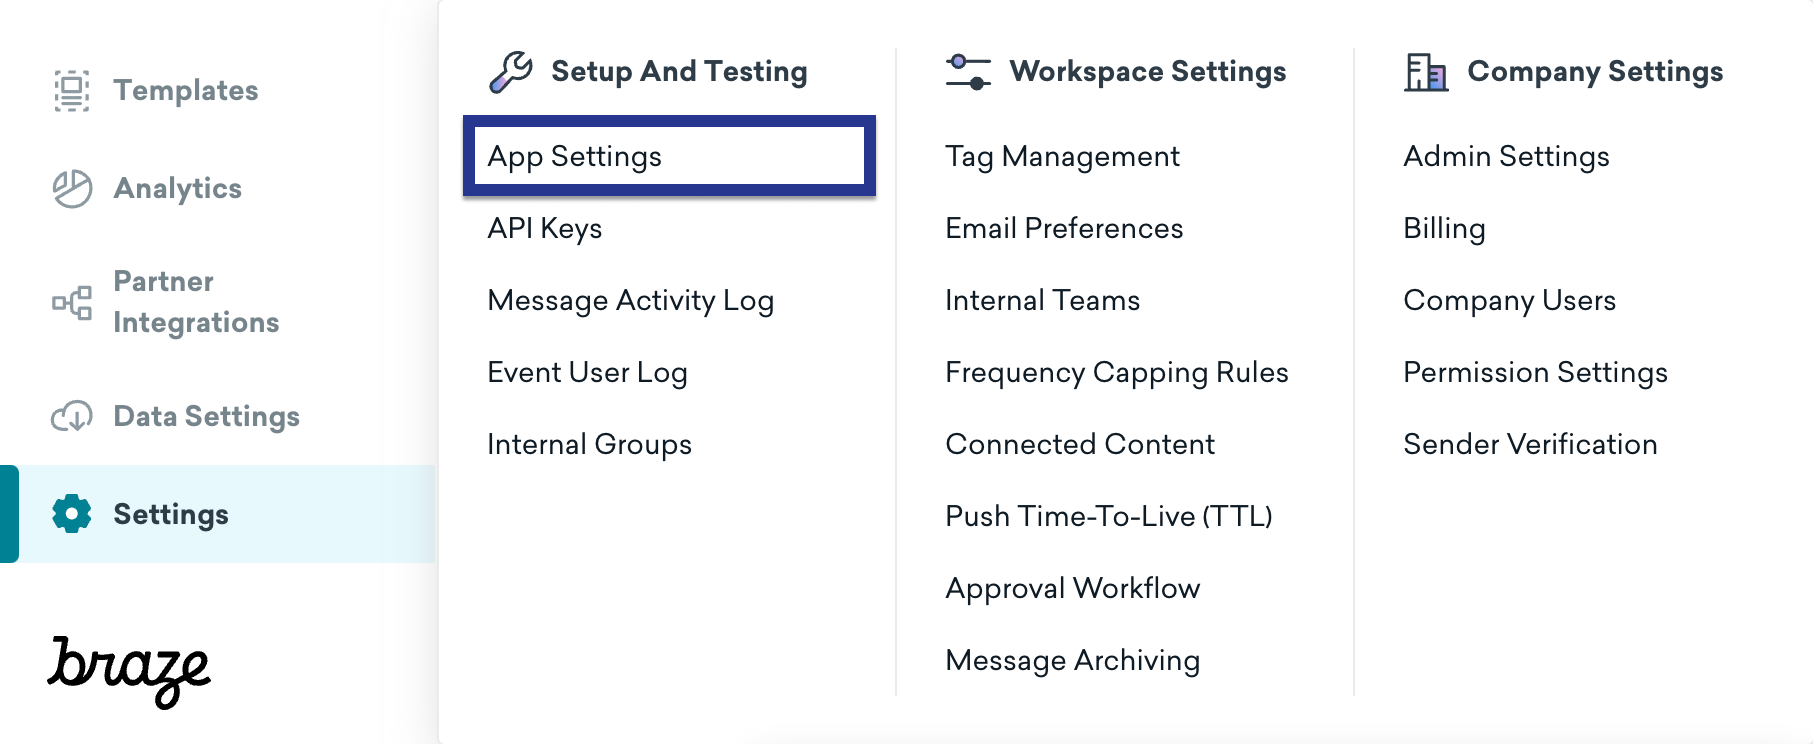 The "Settings" menu open in Braze with "App Settings" highlighted.